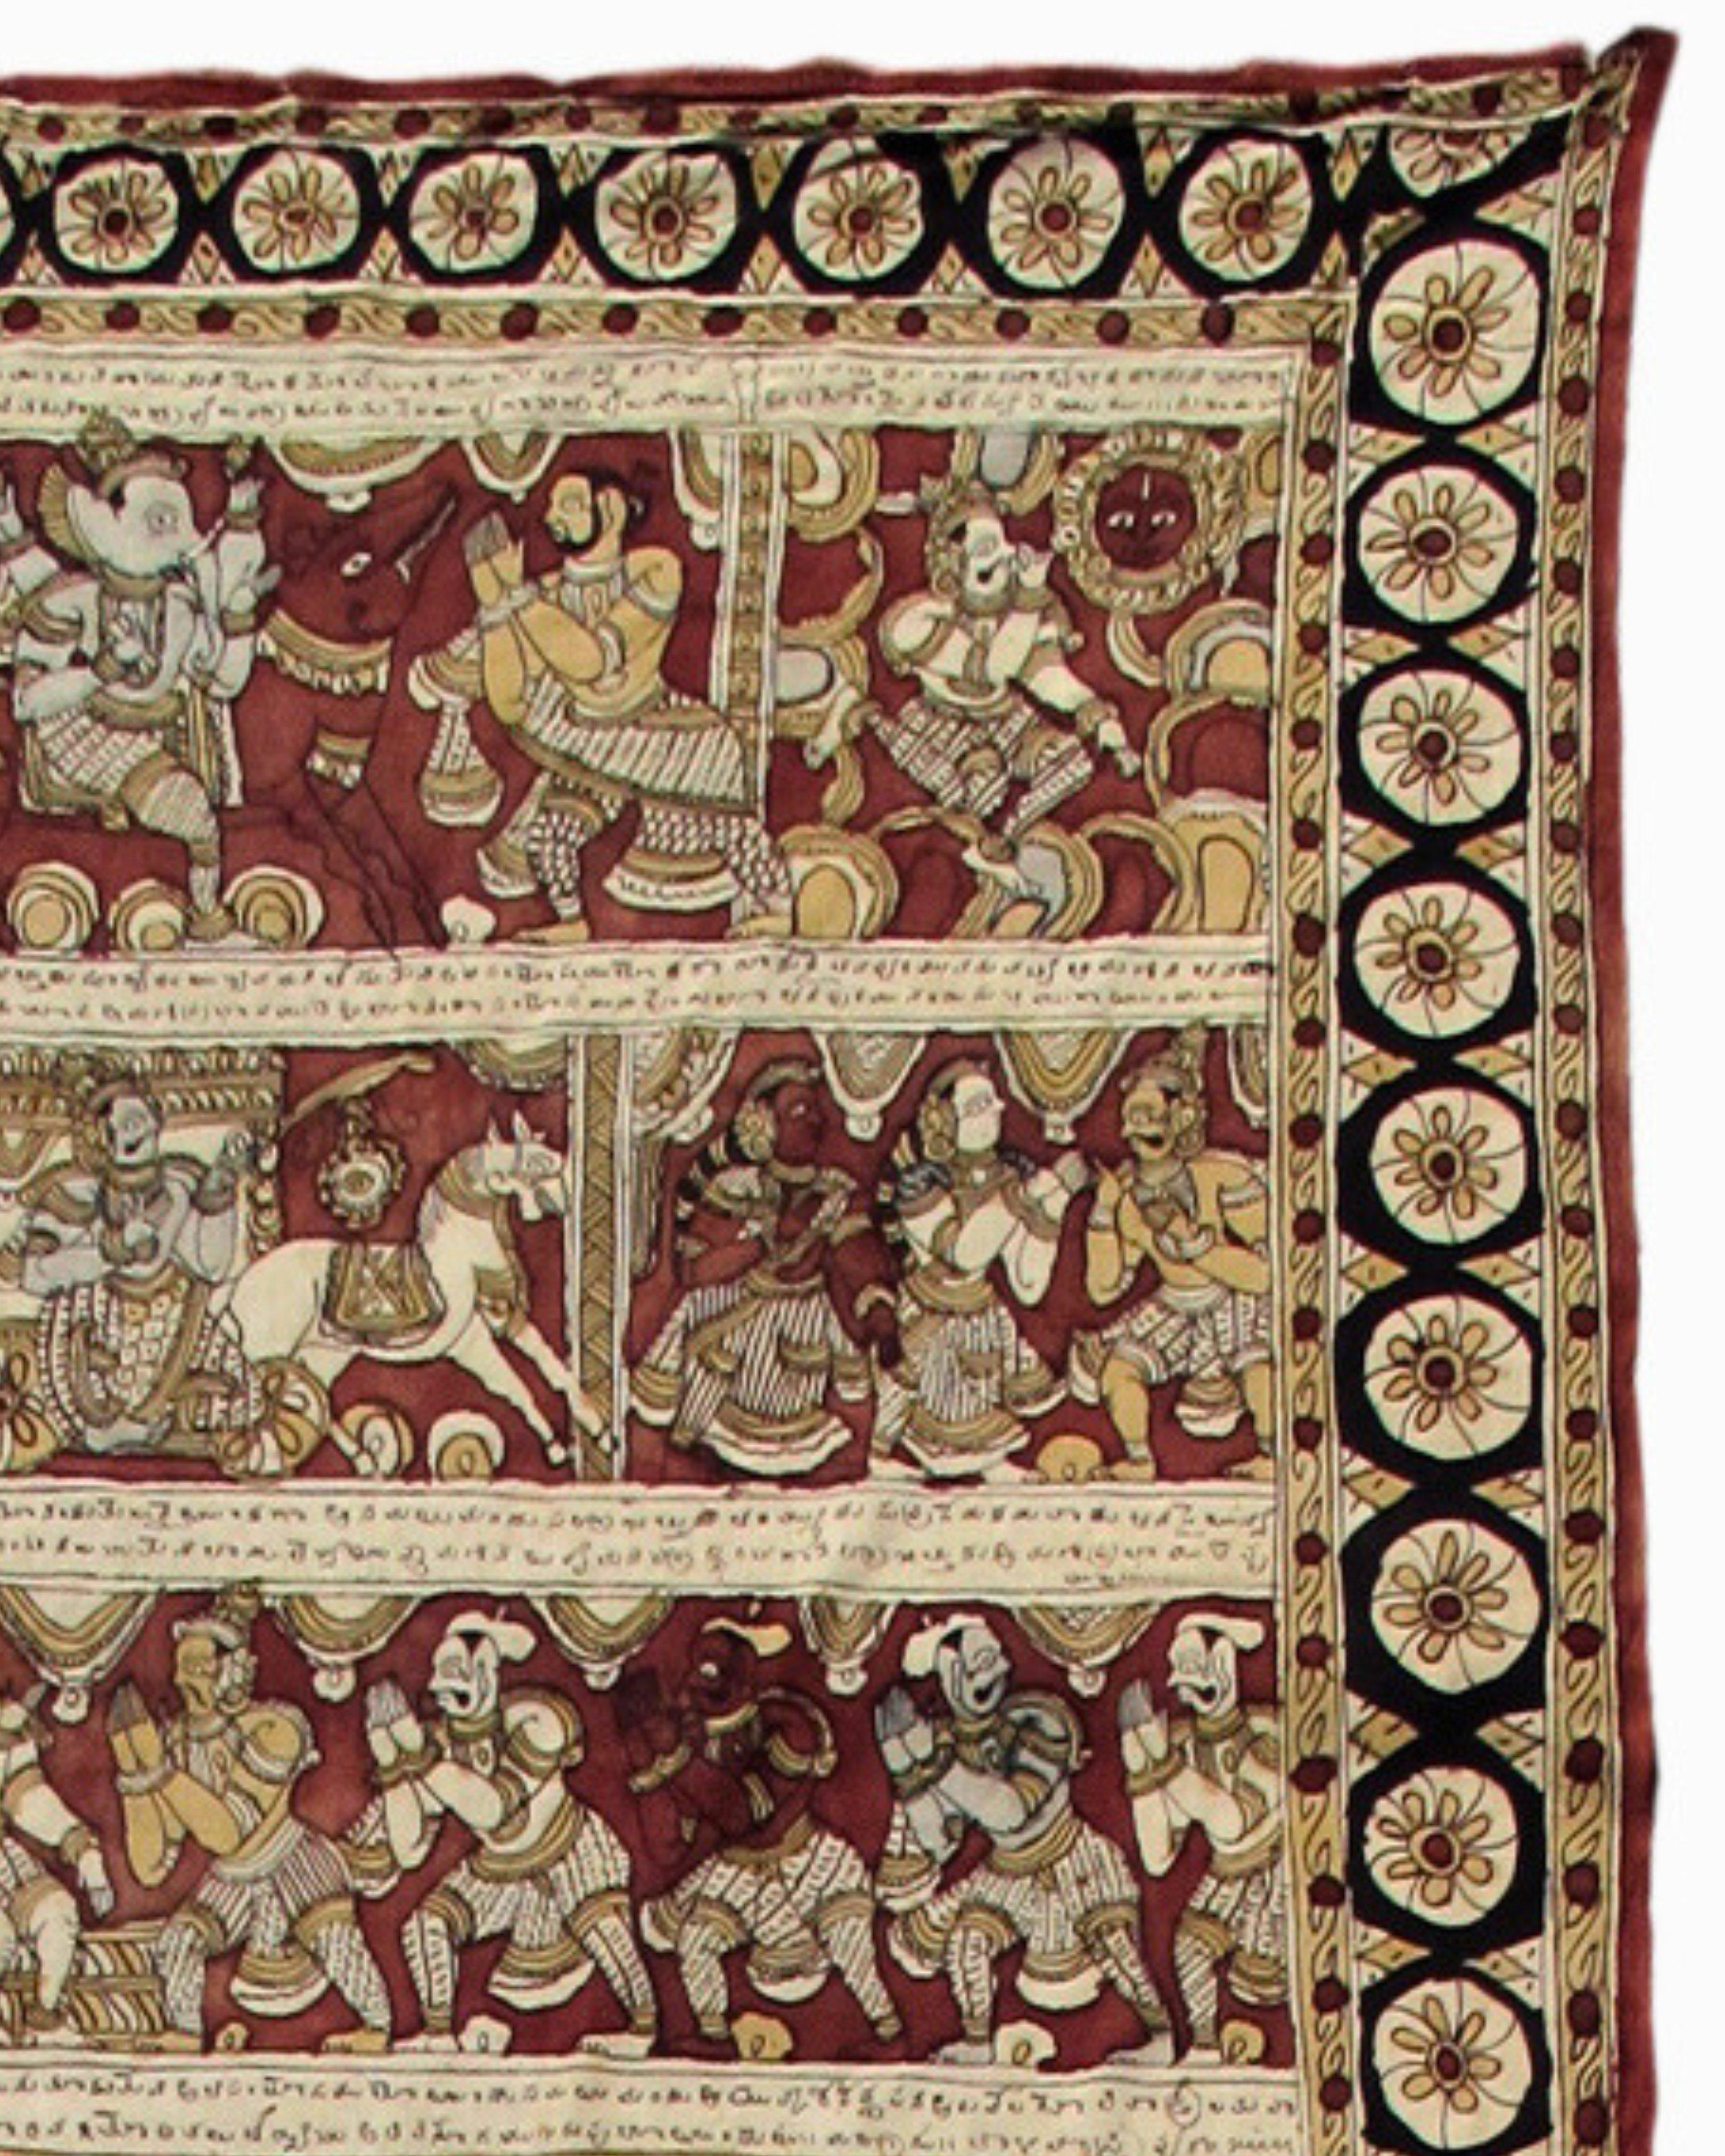 Antique Kalamkari Rug, Early 20th Century

Kalamkari rugs are hand-woven rugs that are made using a centuries-old technique of resist-dyeing and hand printing with blocks. This Kalamkari in particular depicts dozens of people, gods, and animals